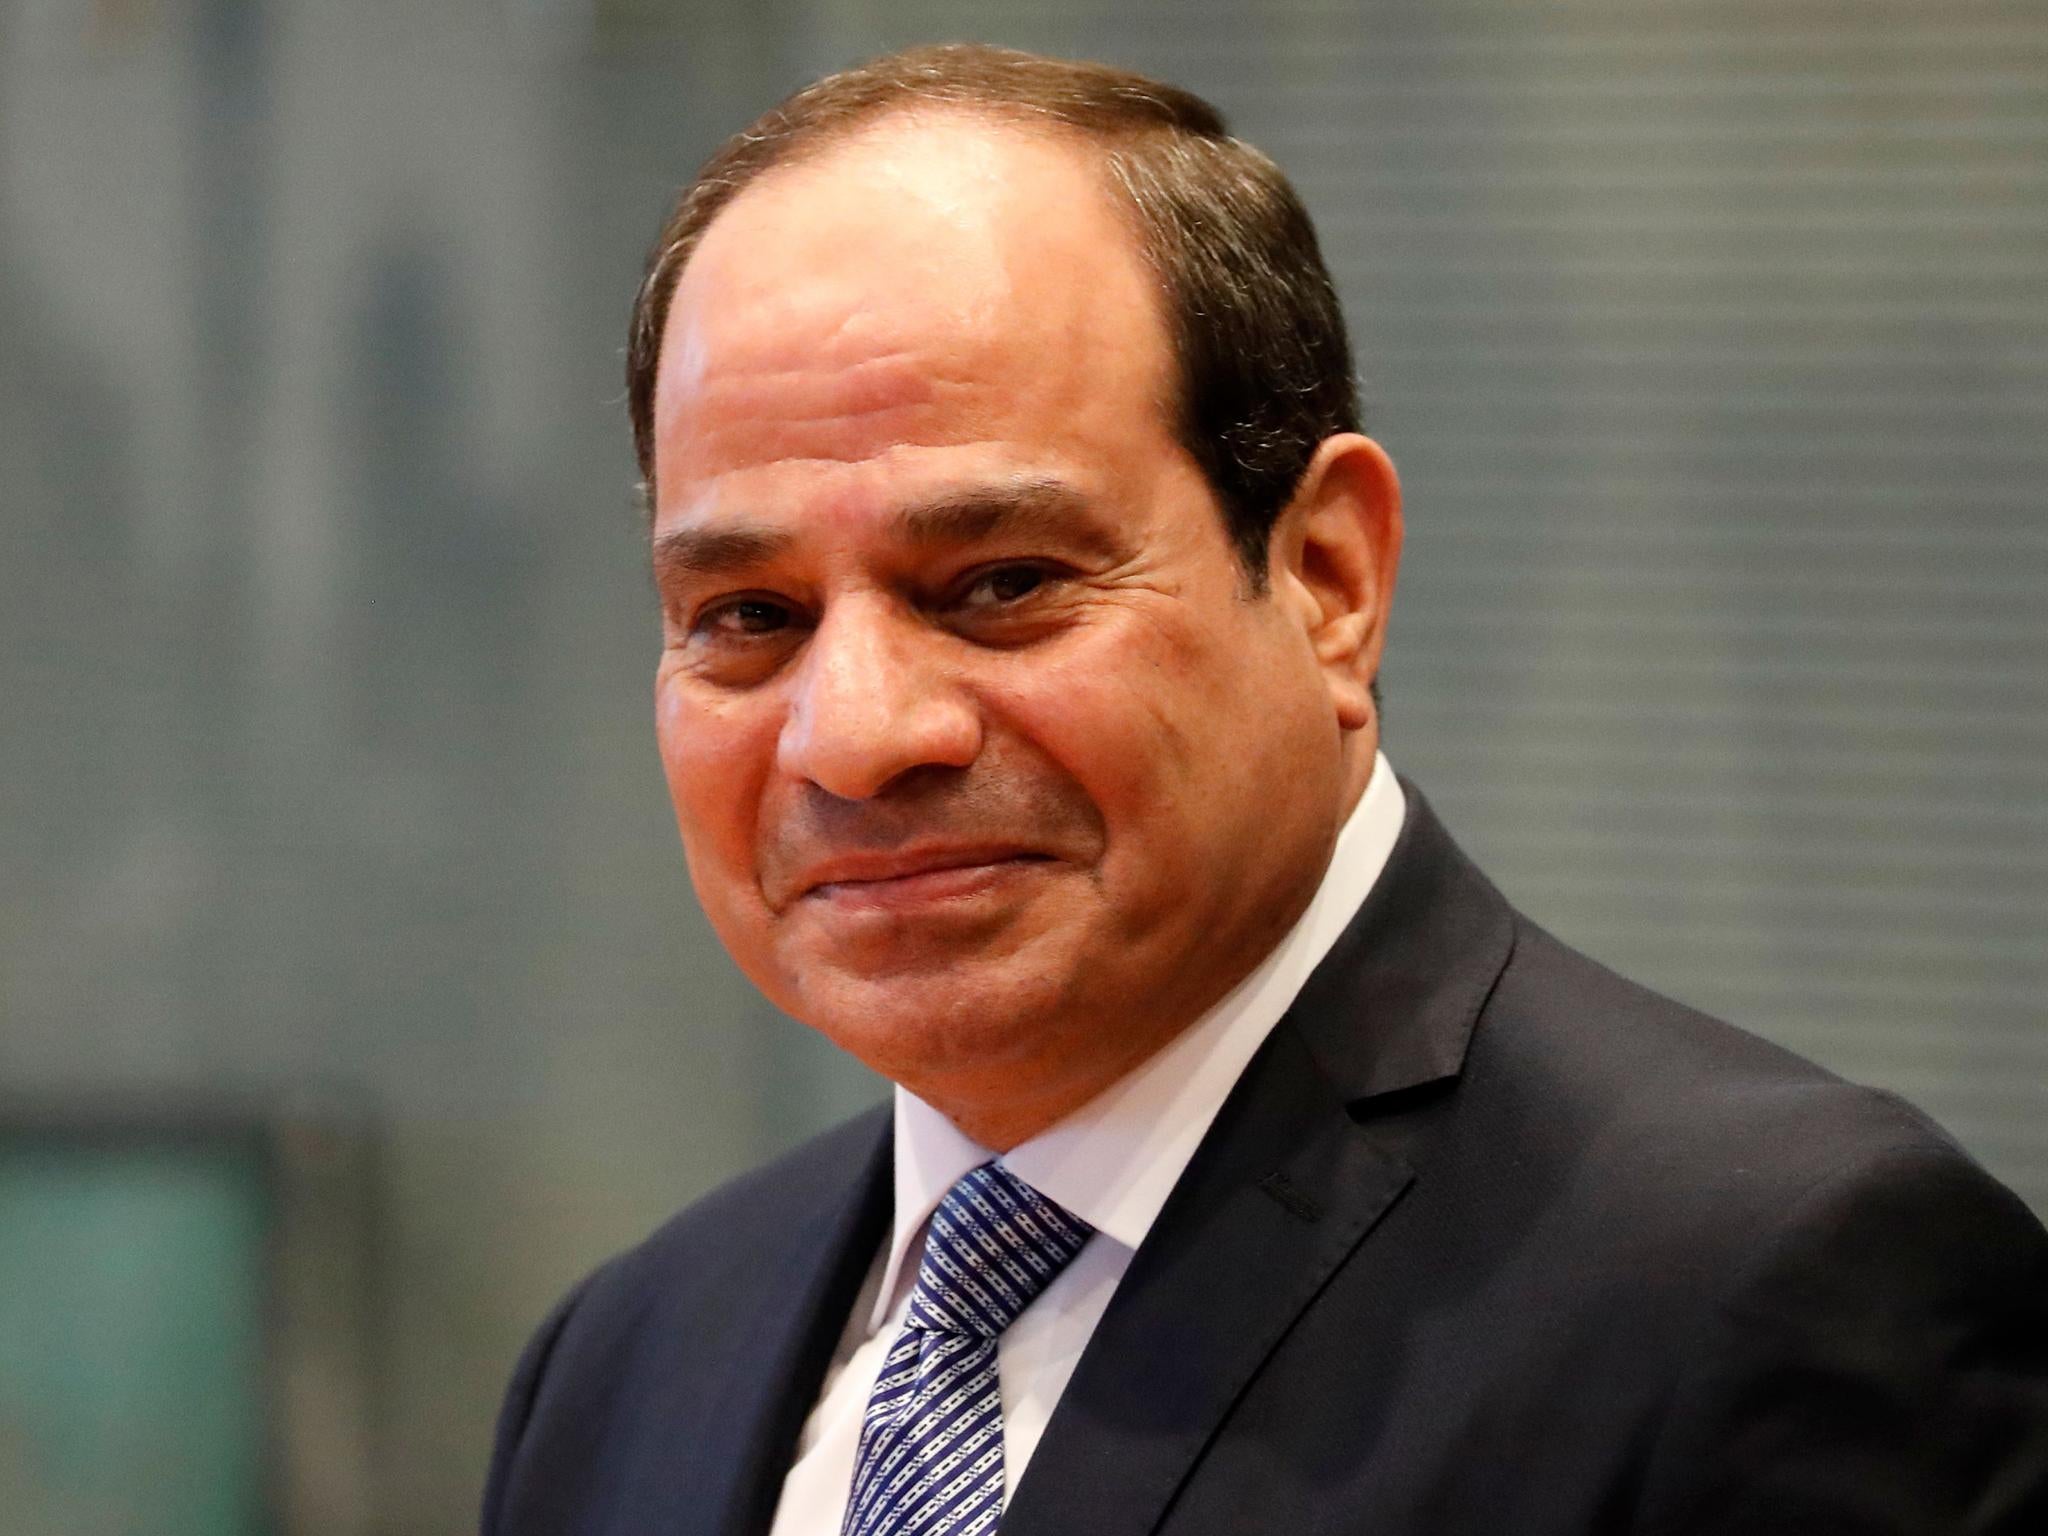 Mr el-Sissi became president in 2014 after leading the overthrow of the elected Mohamed Morsi